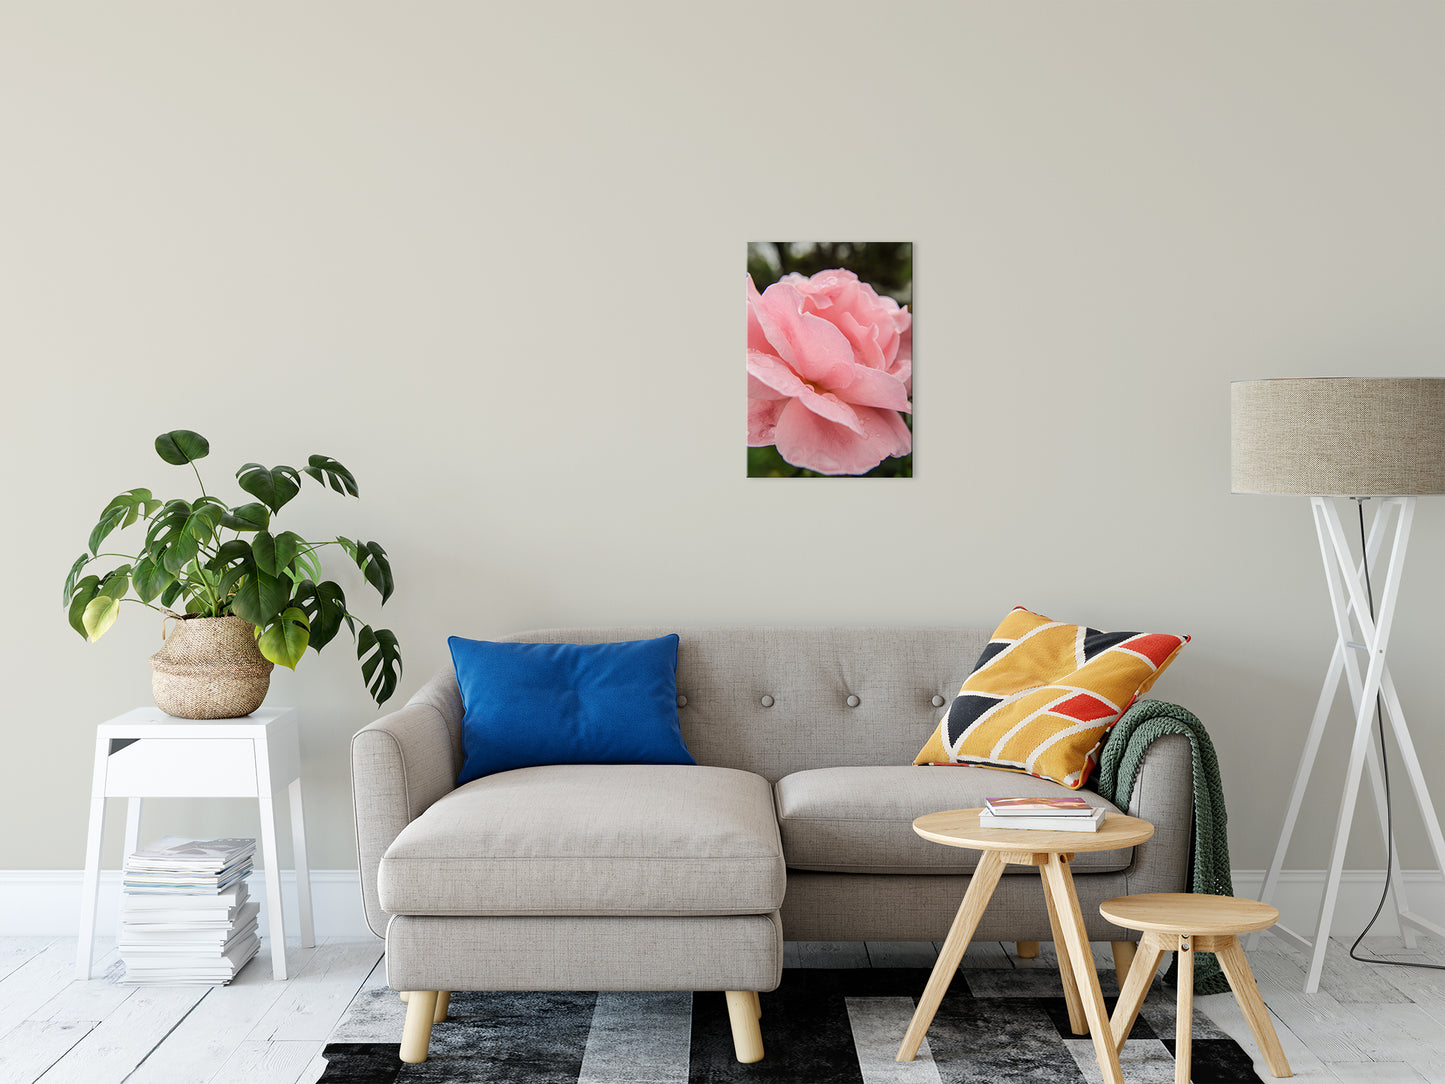 Pink Passion Nature / Floral Photo Fine Art Canvas Wall Art Prints 16" x 20" - PIPAFINEART